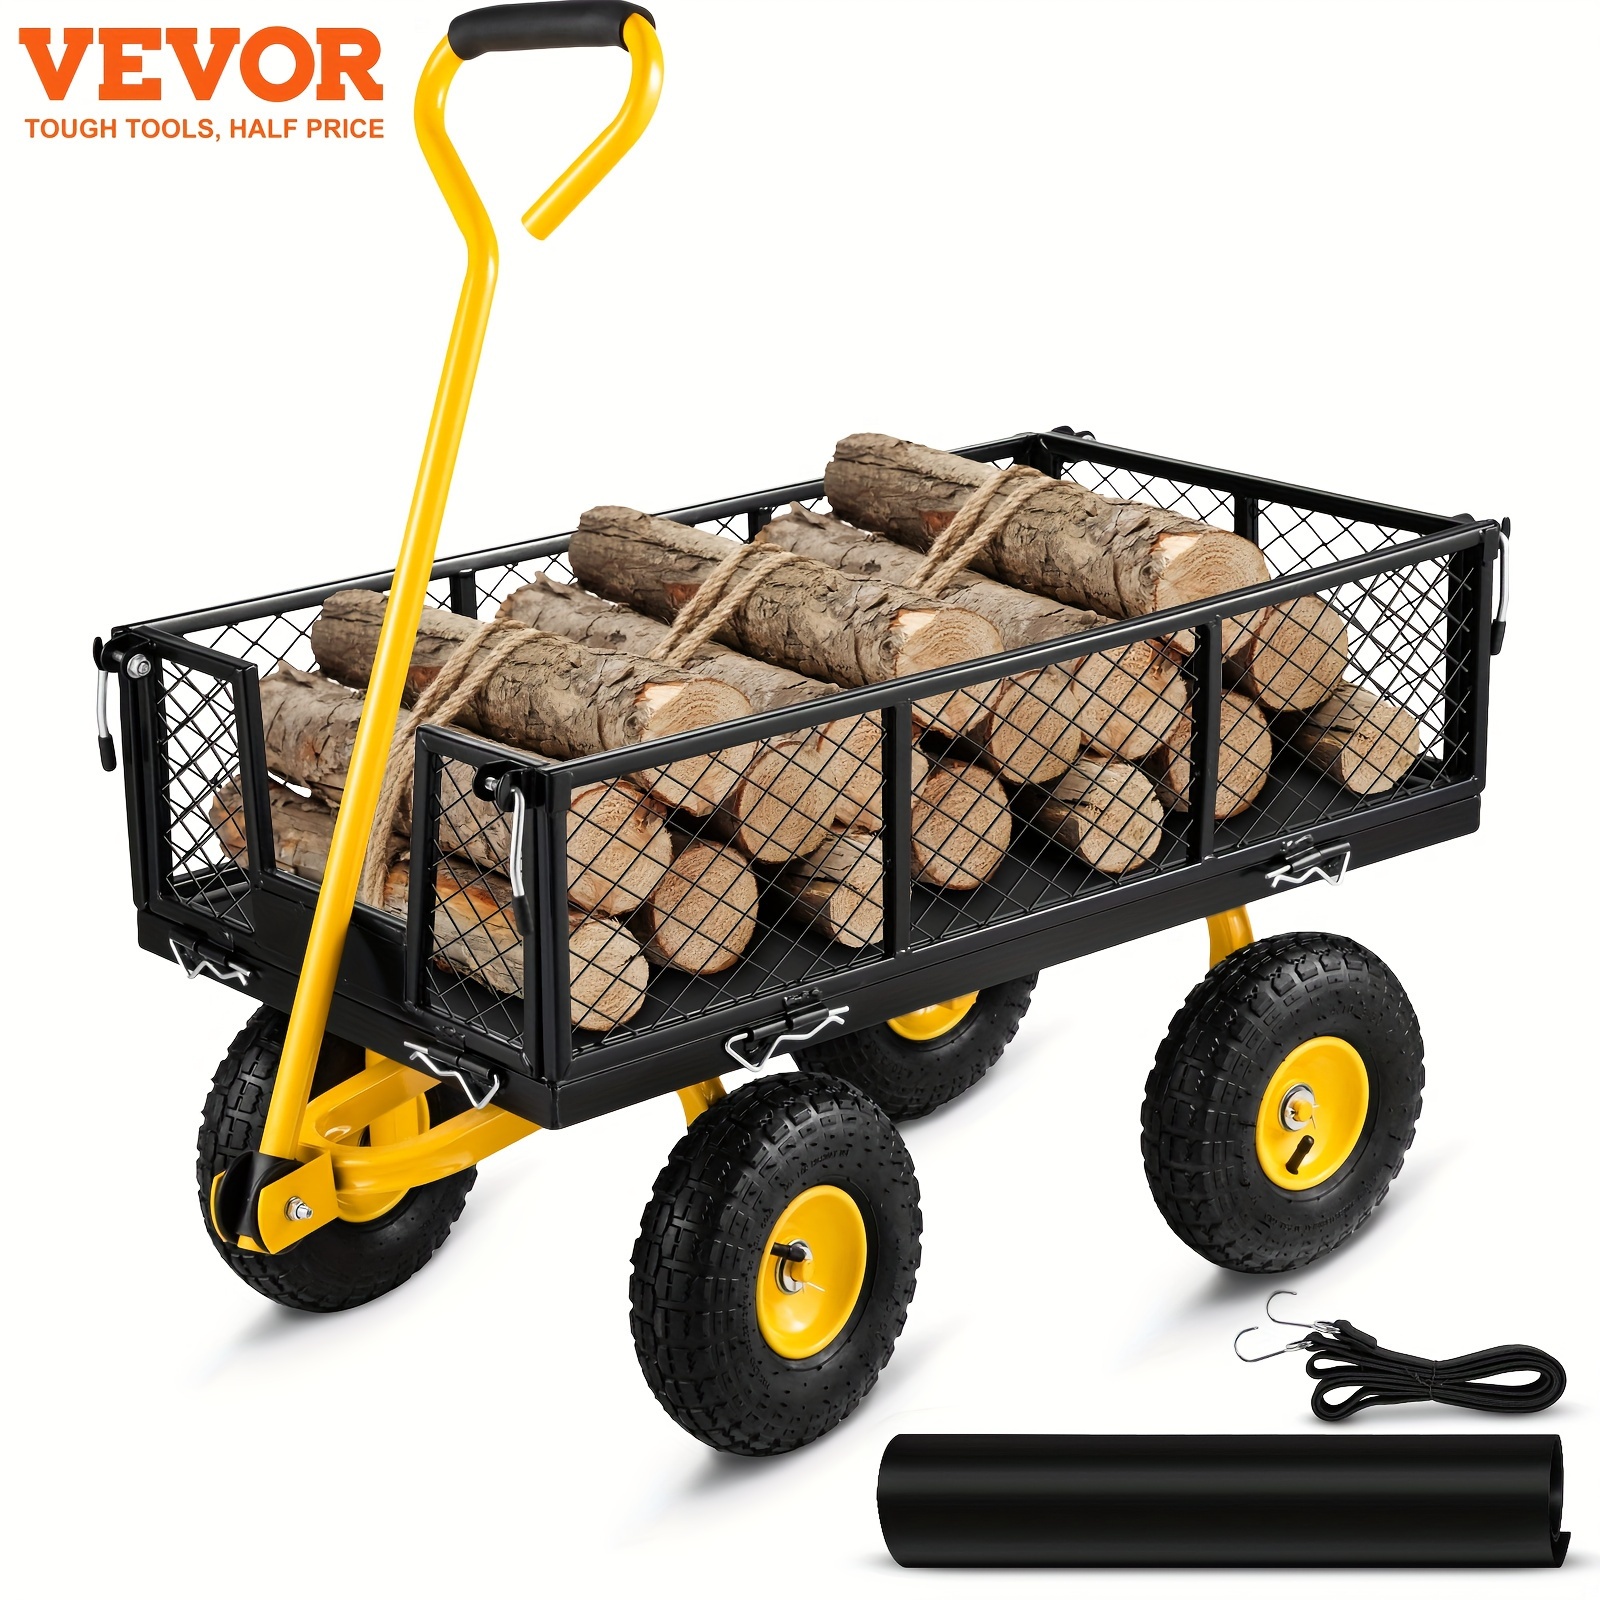 

Steel Garden Cart, Heavy Duty 900 Lbs Capacity, With Removable Mesh Sides To Convert Into Flatbed, Utility Metal Wagon With 180° Rotating Handle And 10 In Tires, Perfect For Garden, Farm, Yar